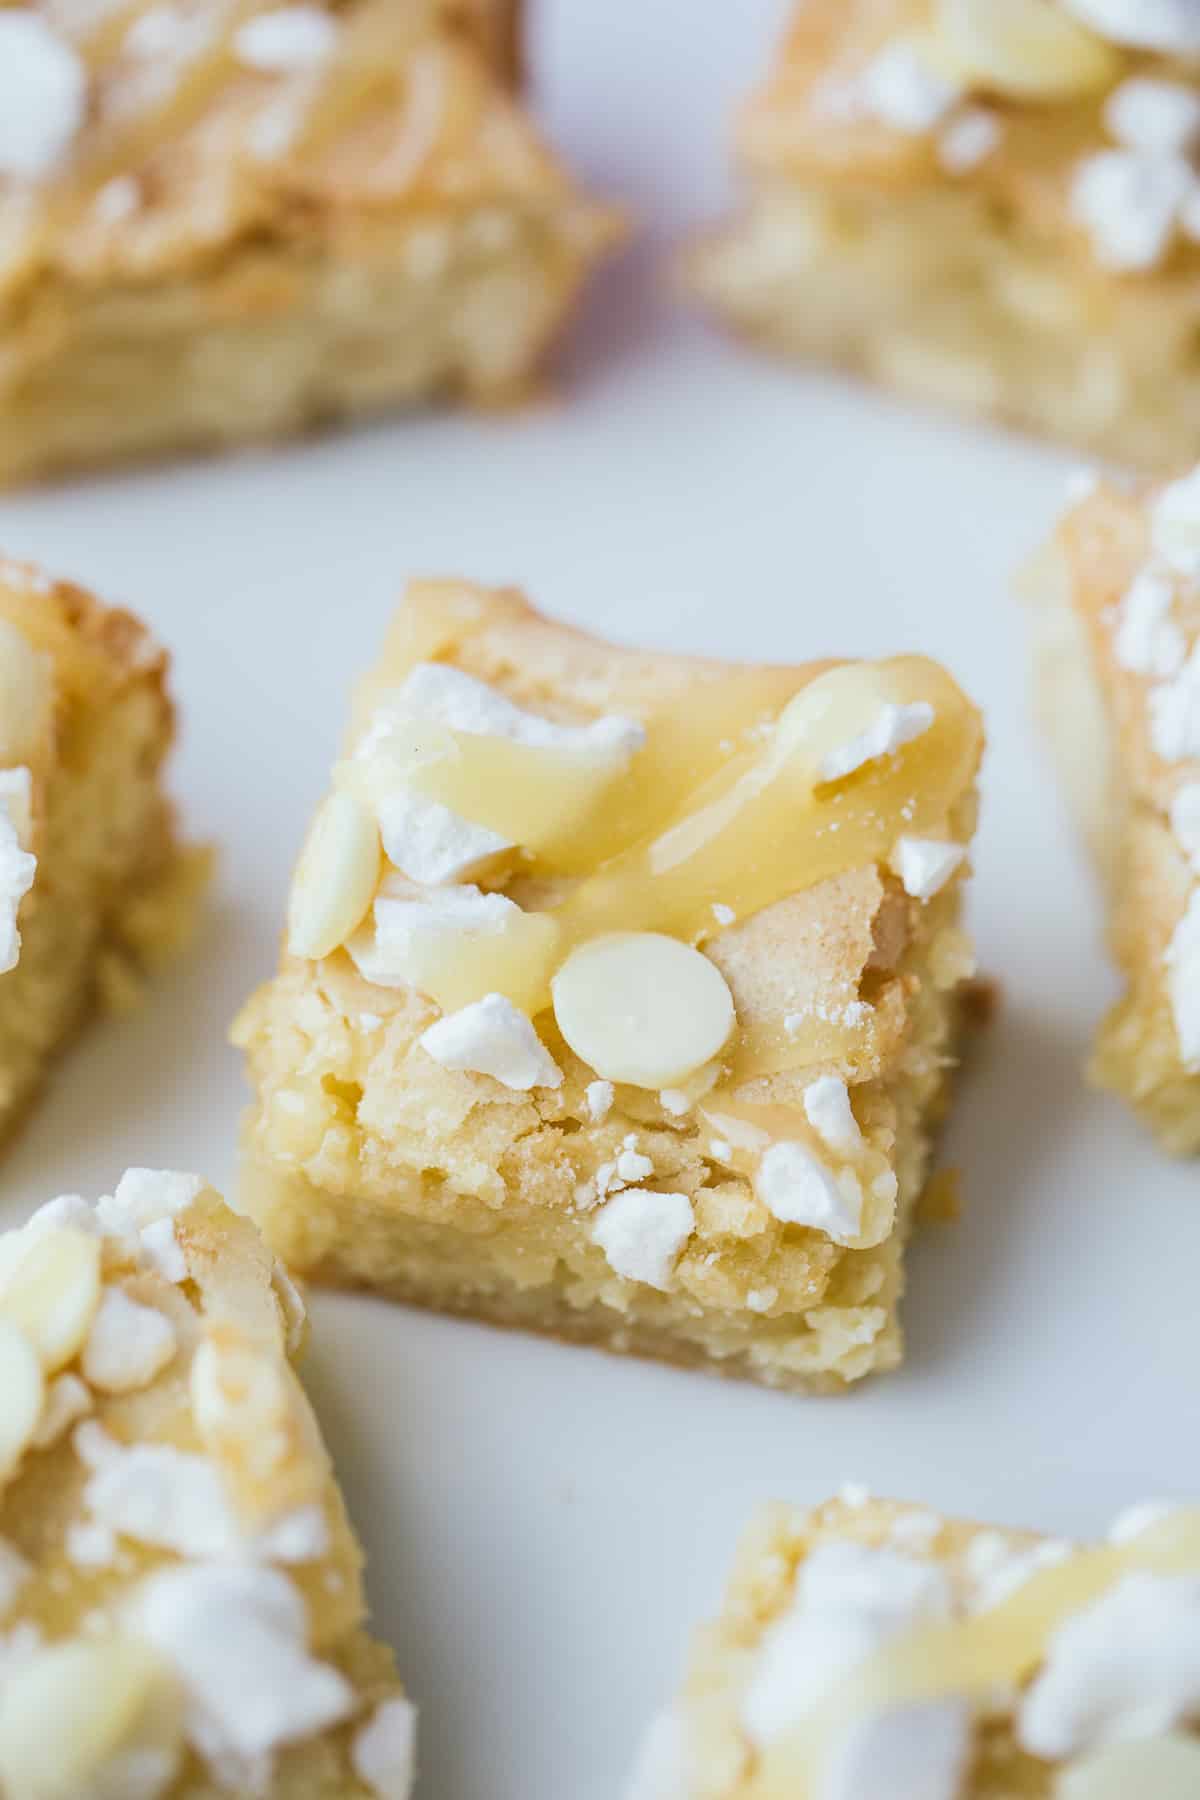 A white chocolate blondie with lemon curd and meringue. 